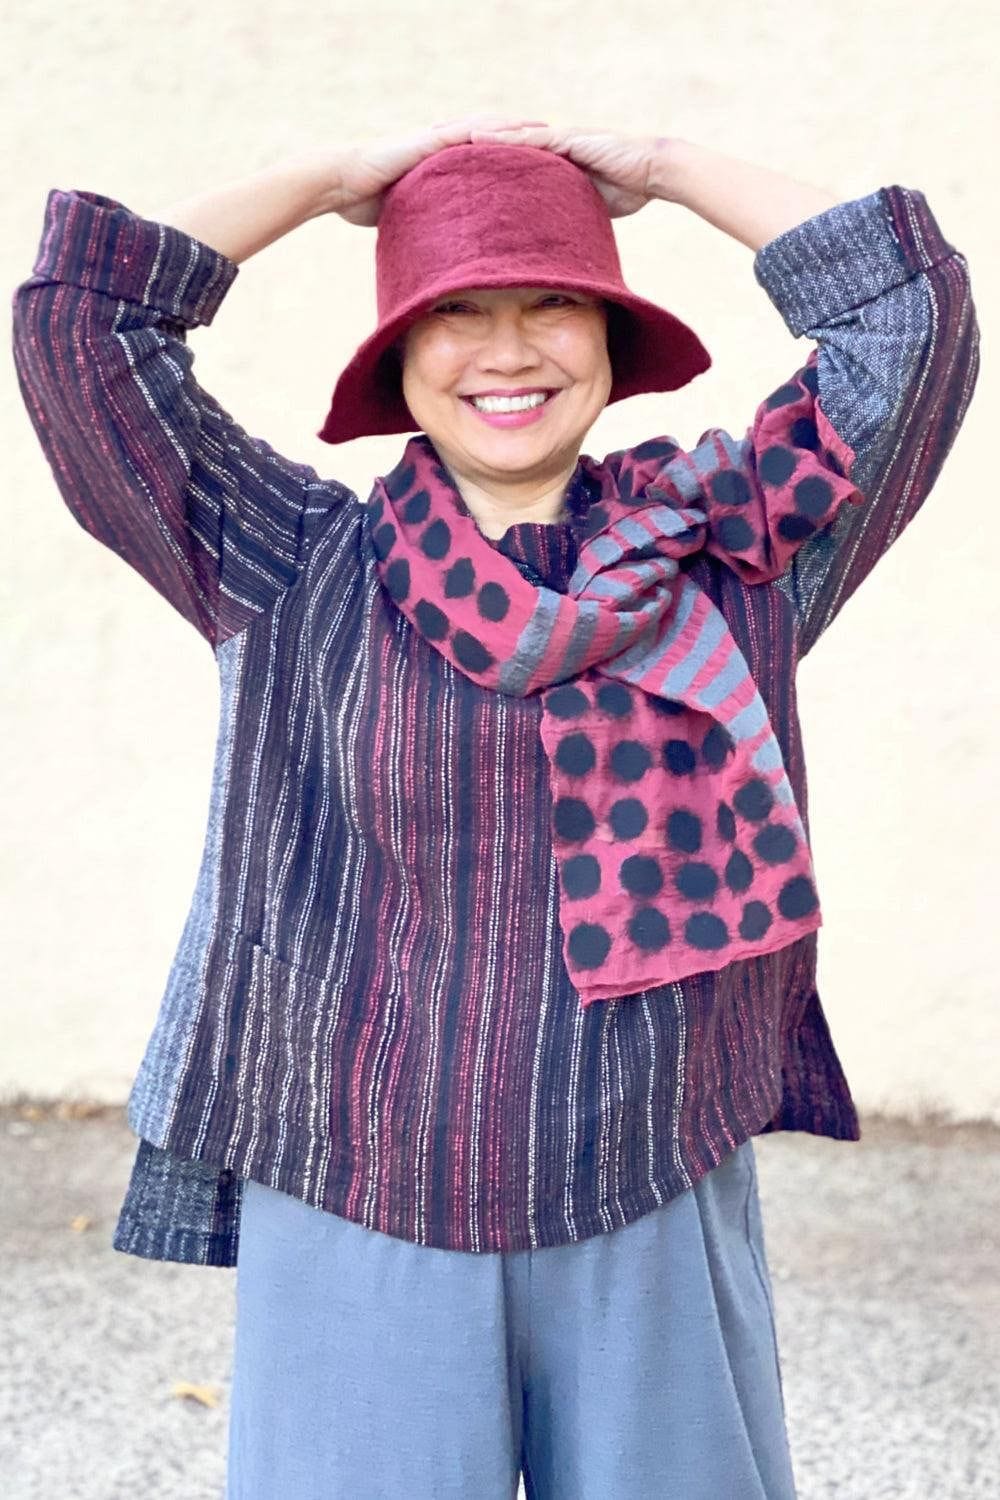 Cranberry Felted hat being worn with a matching felted scarf. A smiling woman is also wearing a handwoven pullover and grey full cut pants.